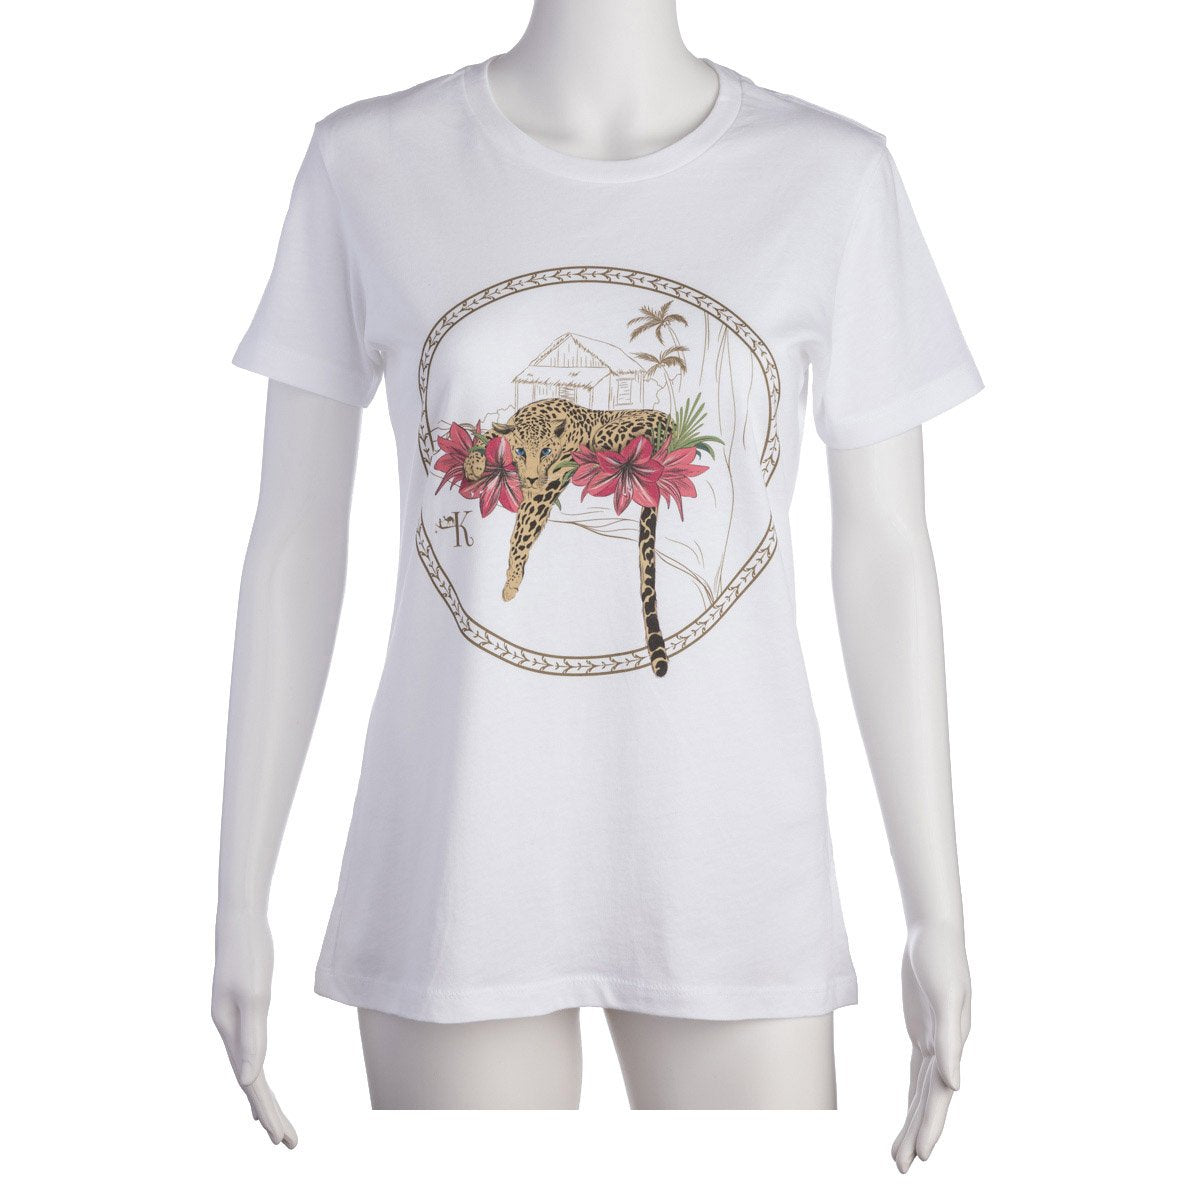 Tee Shirt - Exotic Places